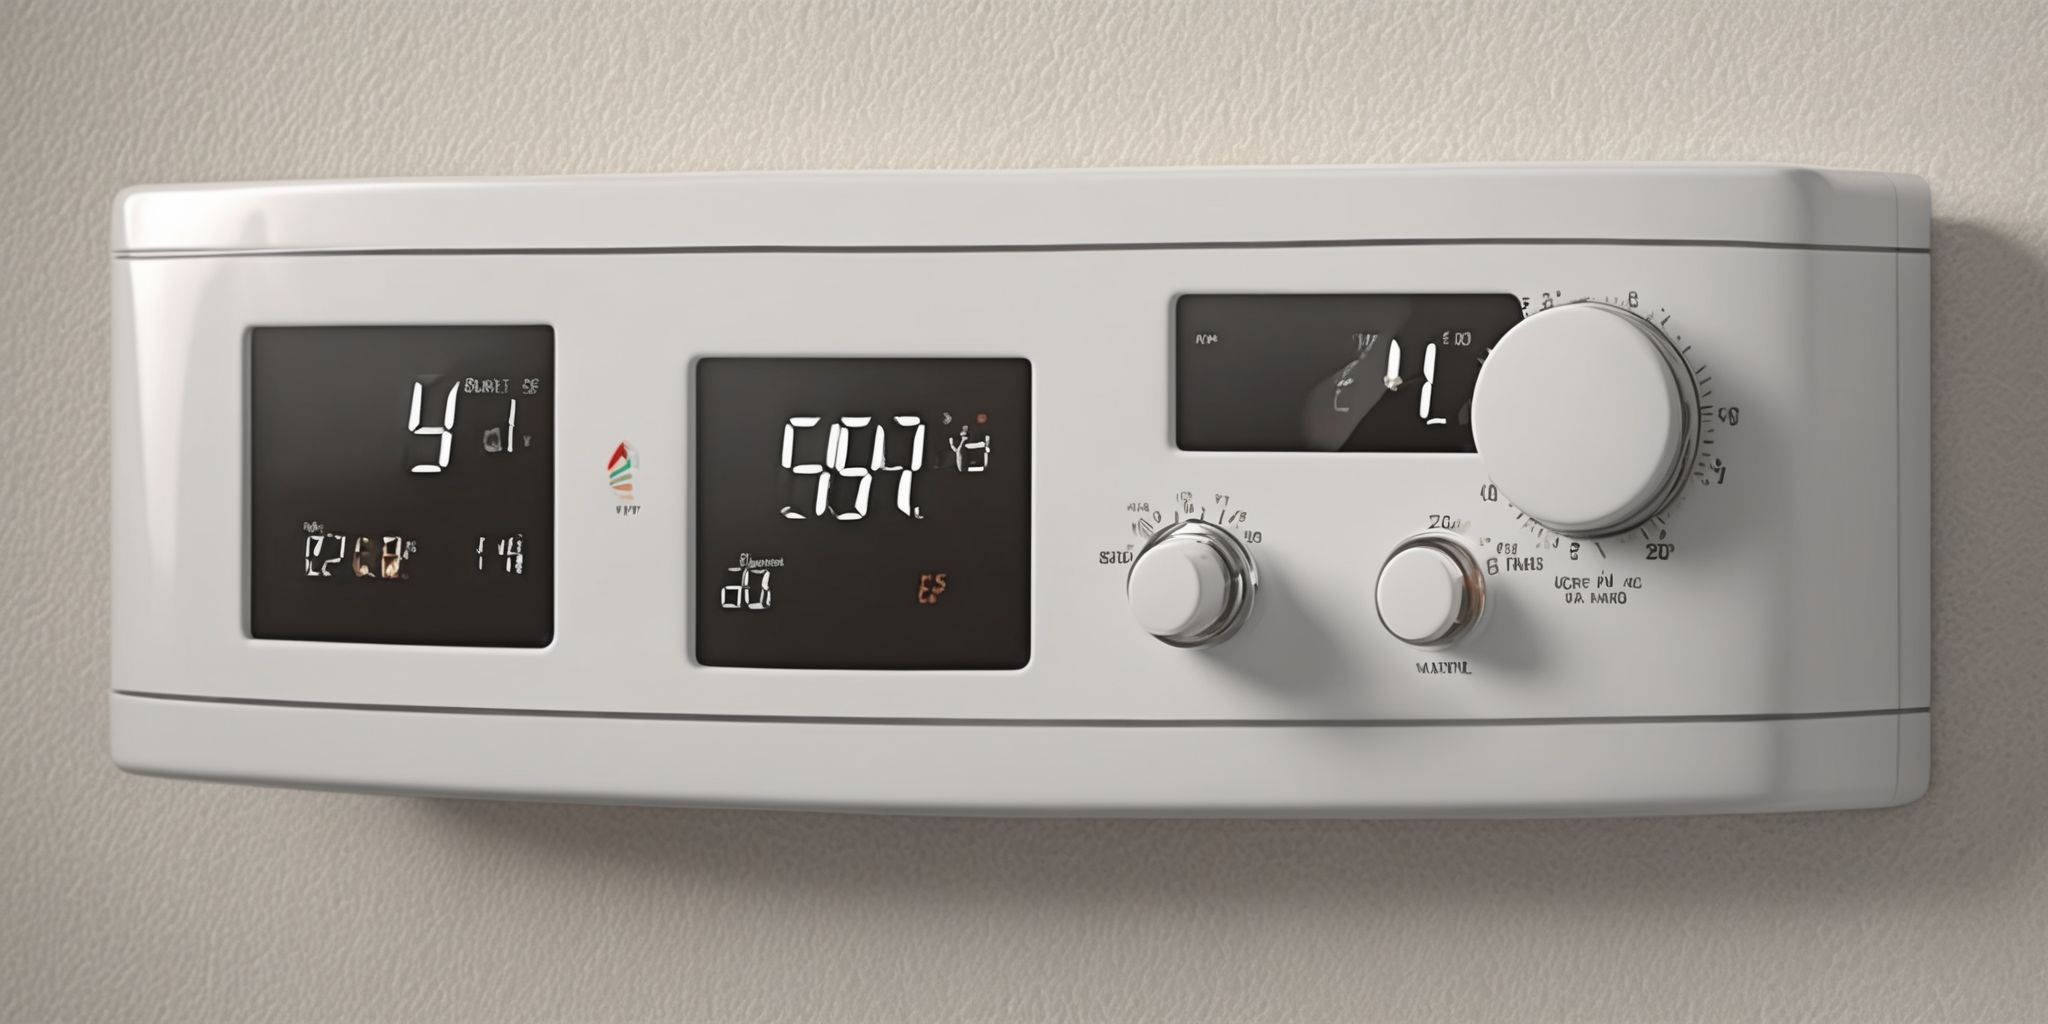 Thermostat  in realistic, photographic style